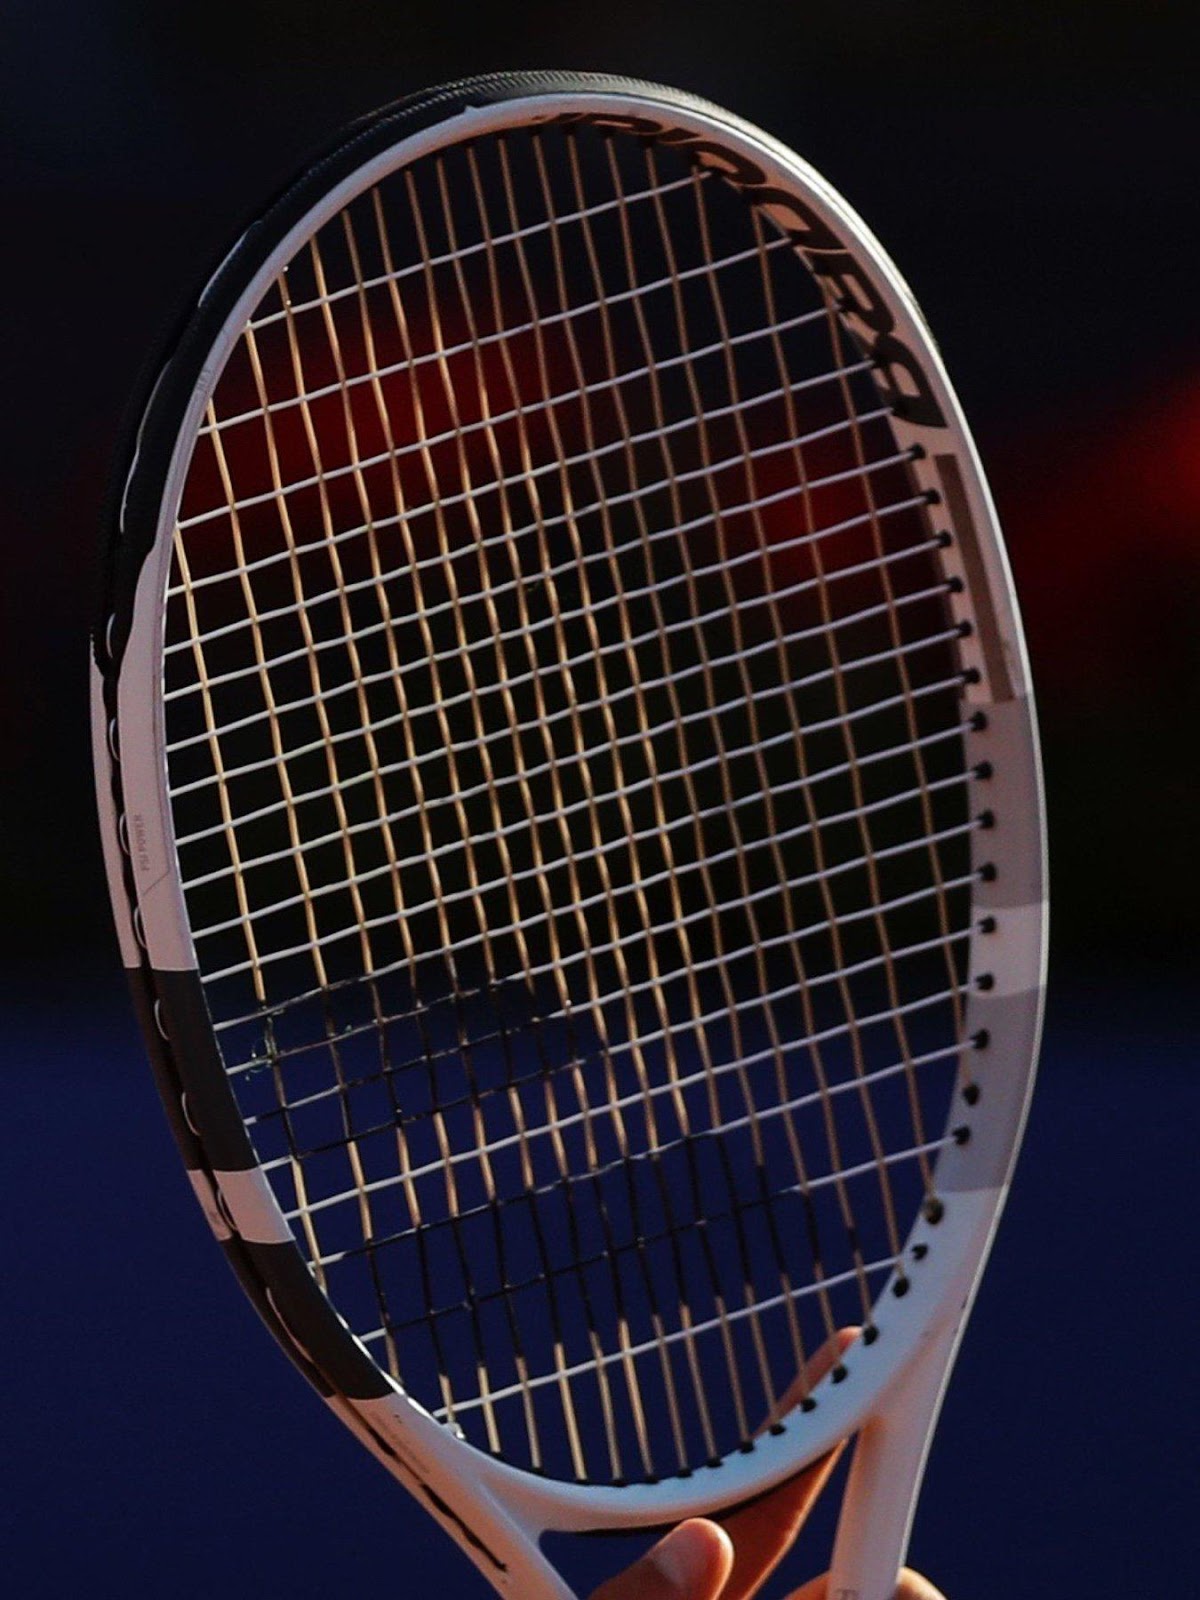 A person holding a tennis racket

Description automatically generated with medium confidence